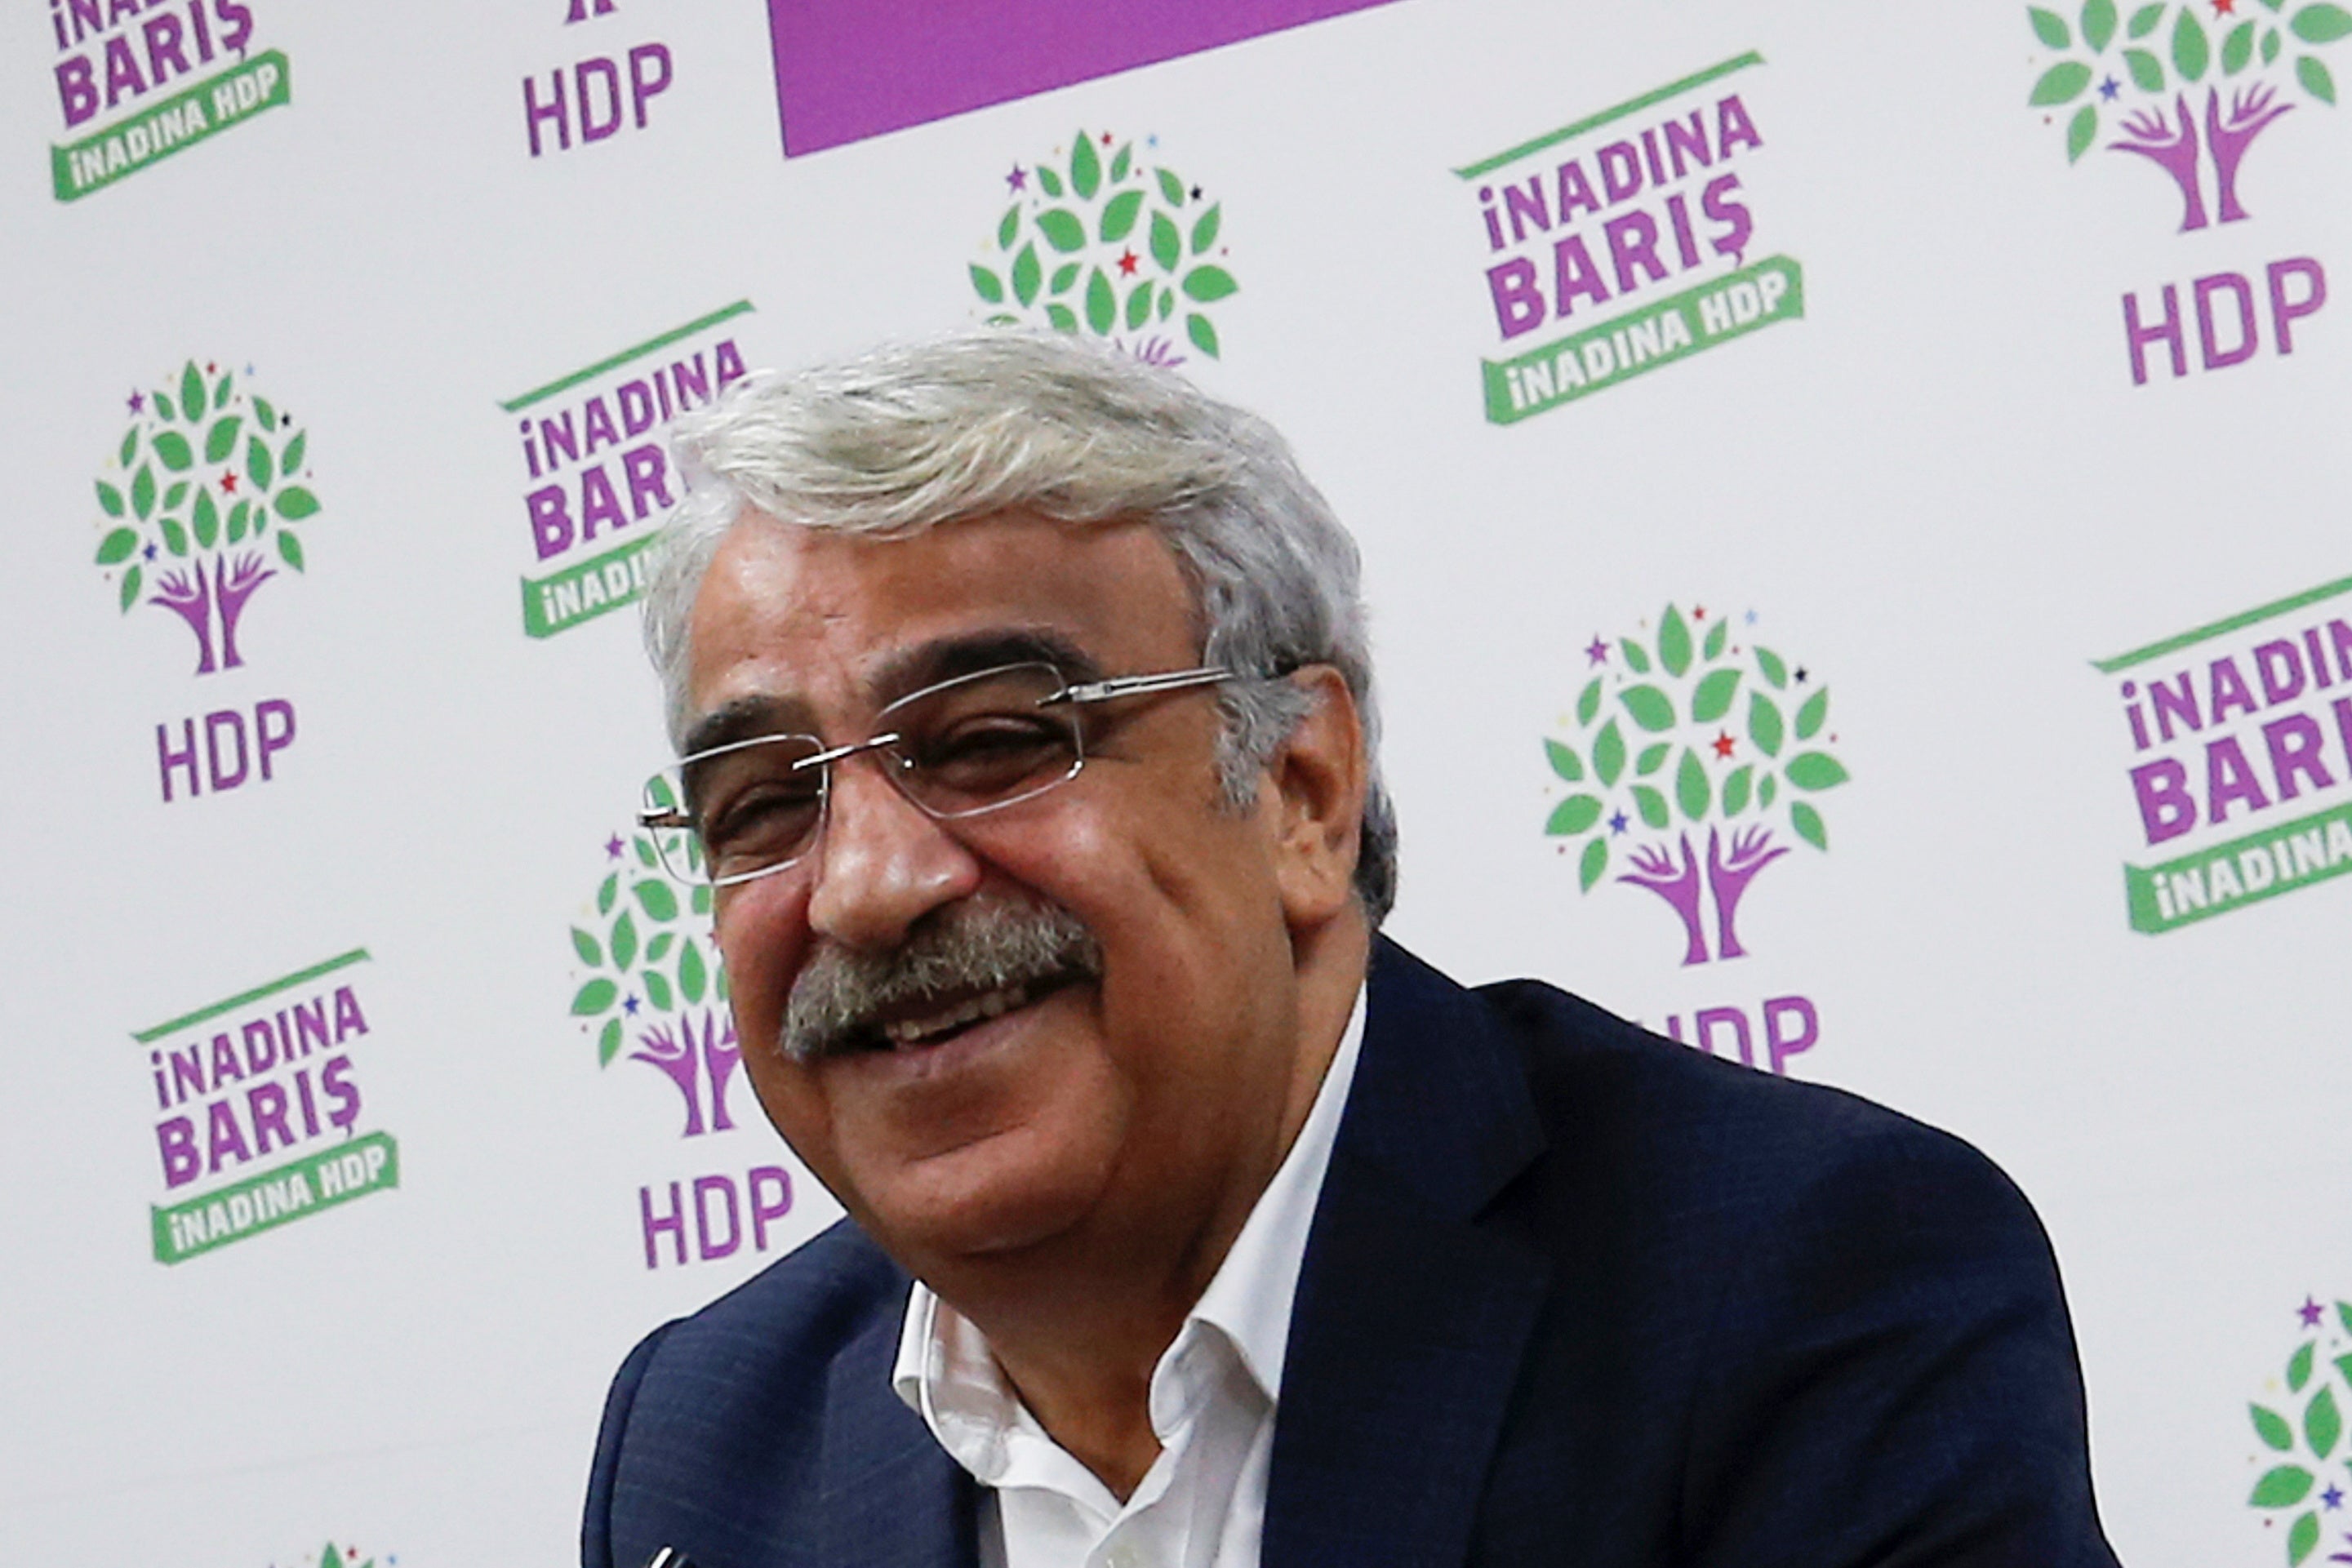 Mithat Sancar, co-leader of the pro-Kurdish Peoples' Democratic Party (HDP), speaks during a news conference at the party headquarters in Ankara